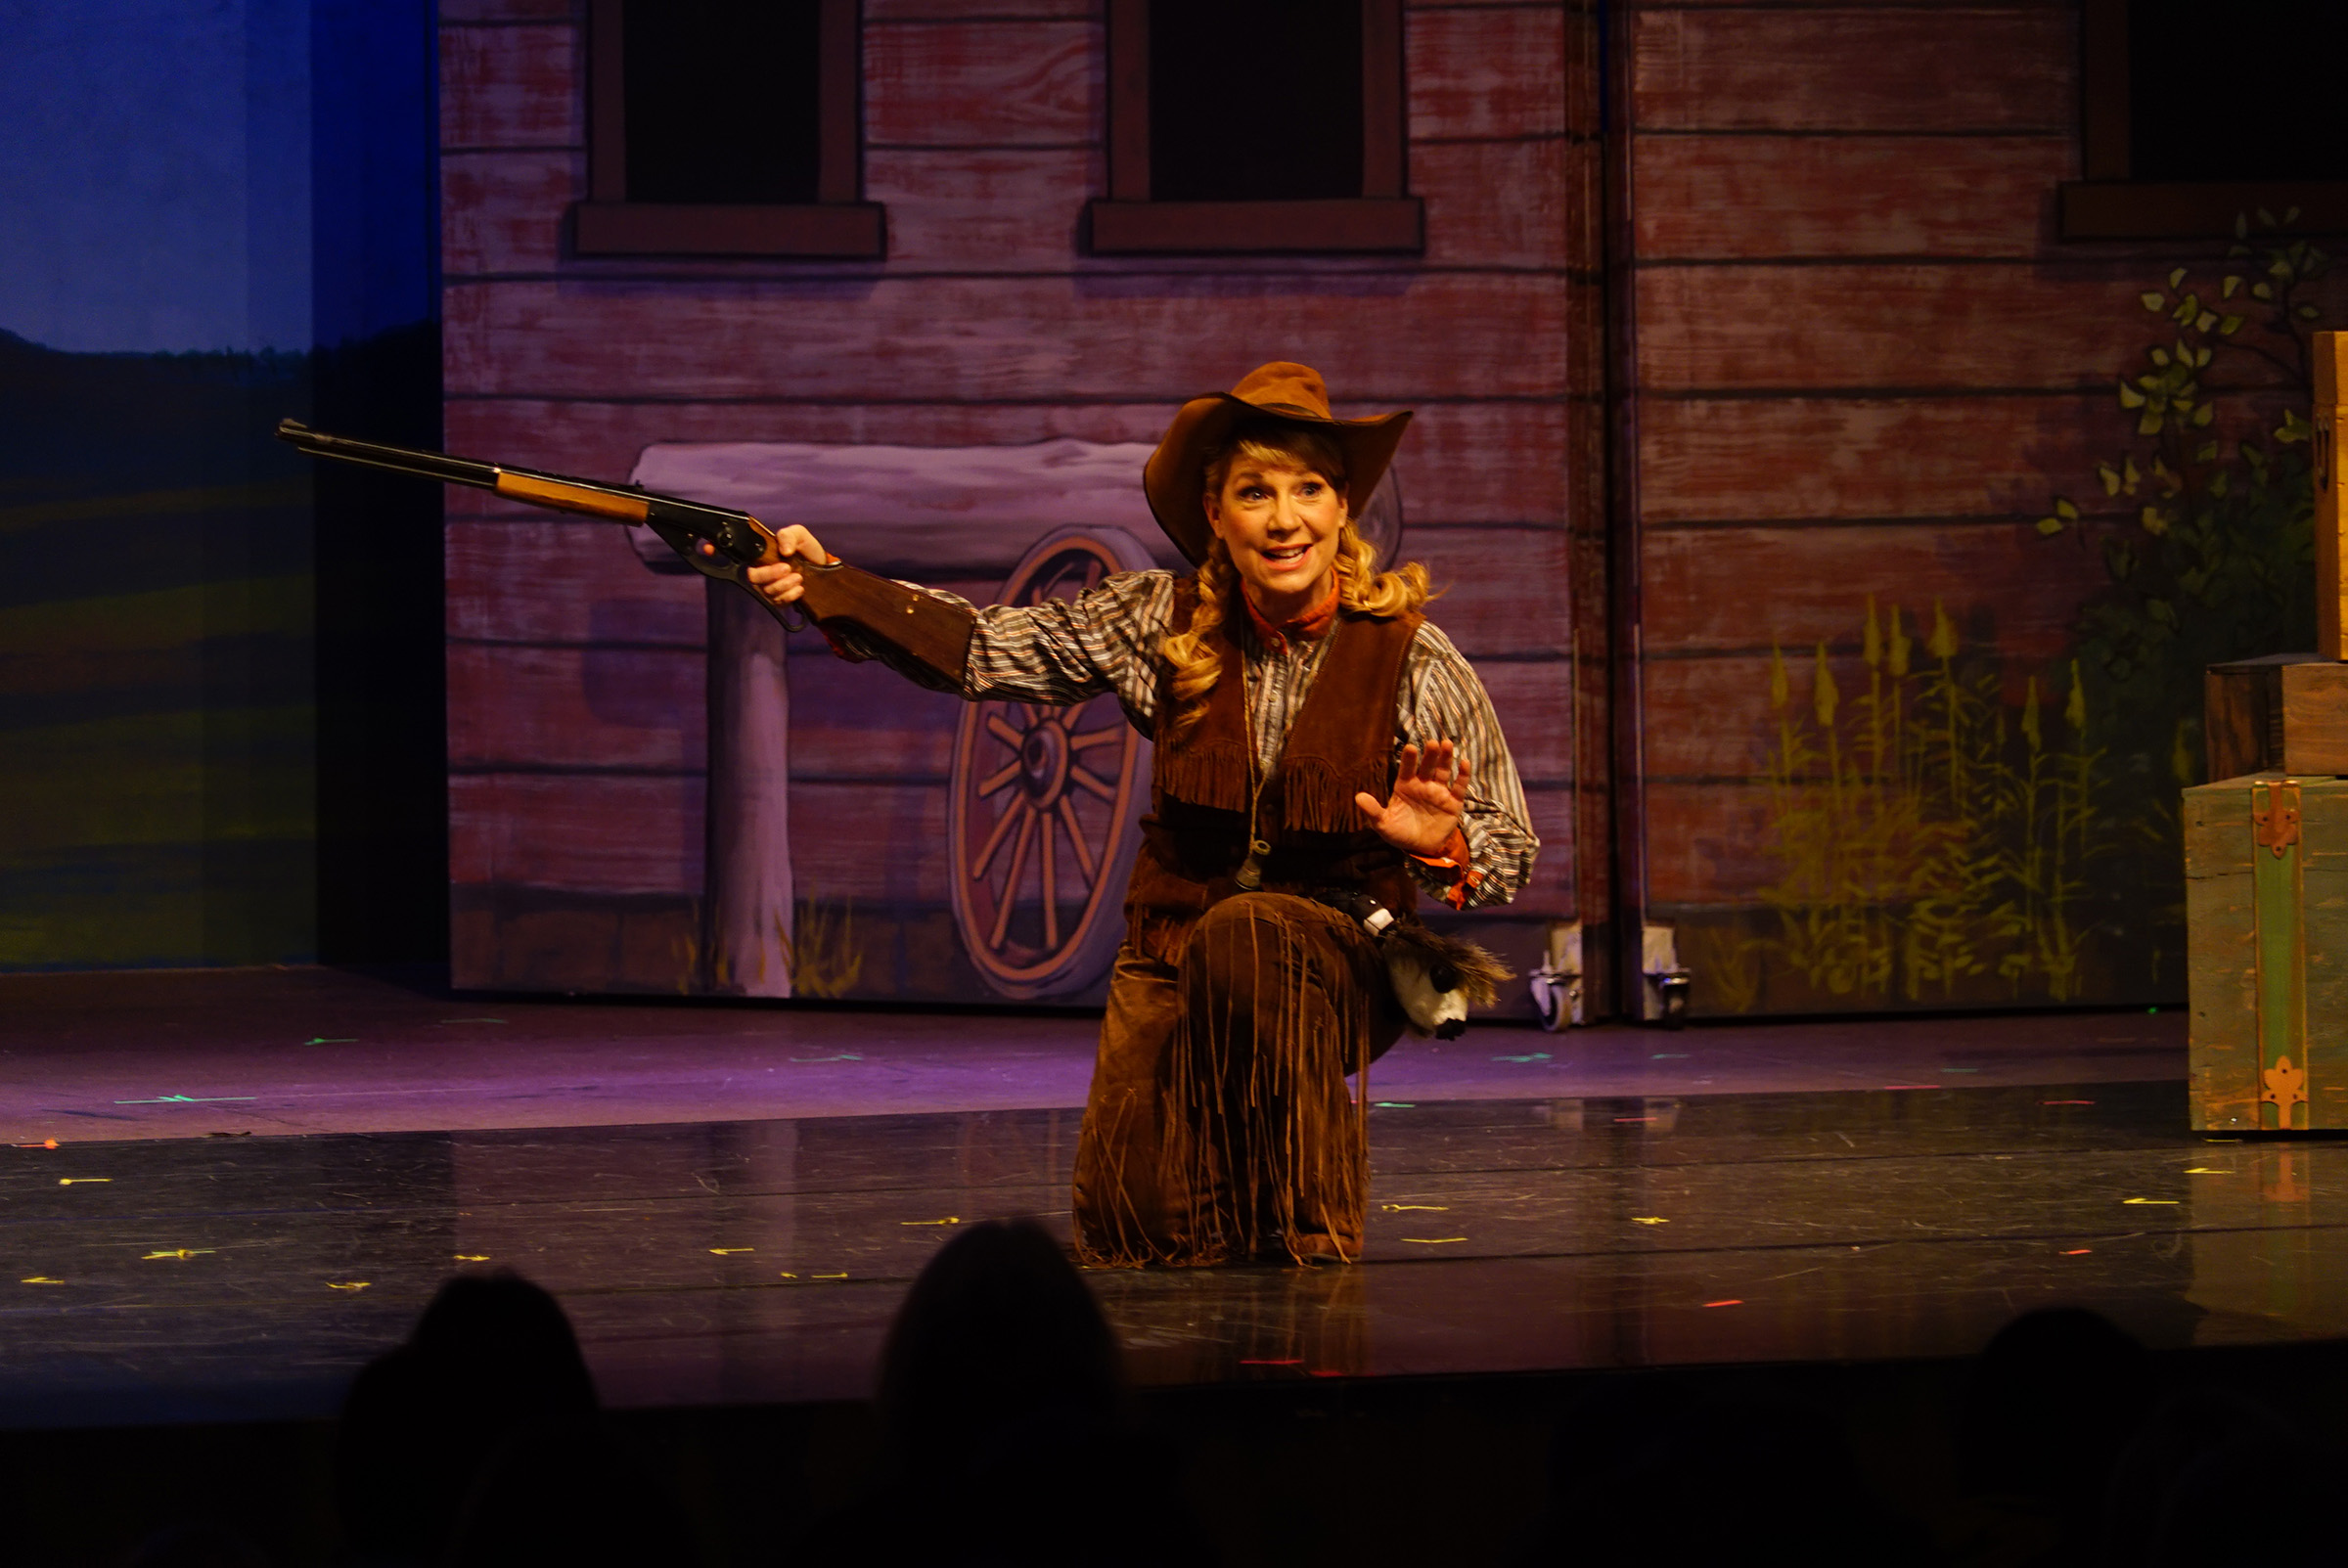 Need a pre-holiday break? Consider a trip to the Old West — to the musical, “Annie Get Your Gun” — that features great performances by a polished and enthusiastic troupe of singers and dancers